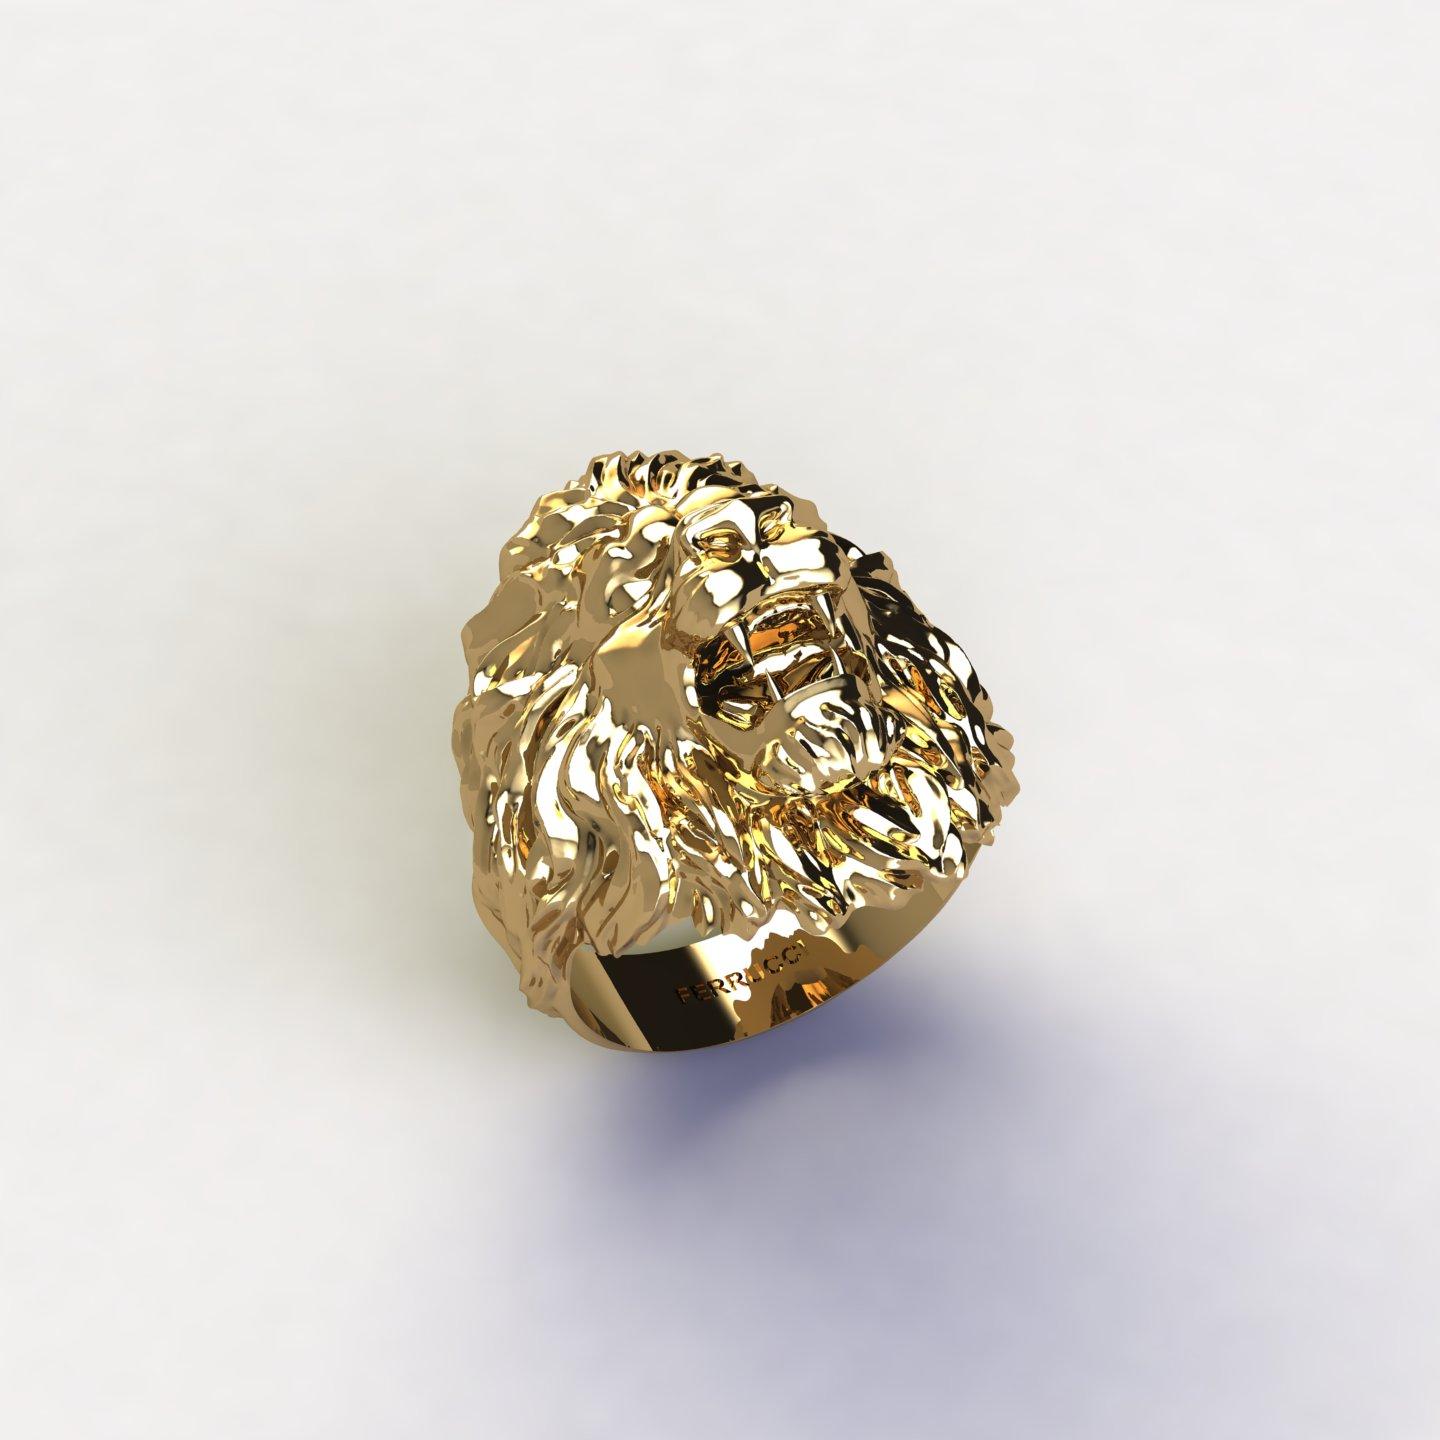 The Lion Ring 18k Solid Gold Lion Ring, highly detailed, made to order of your size each time, due to the finger size fitting importance.
This is a solid piece of 18k Yellow Gold, with its weight, for people that love feeling their